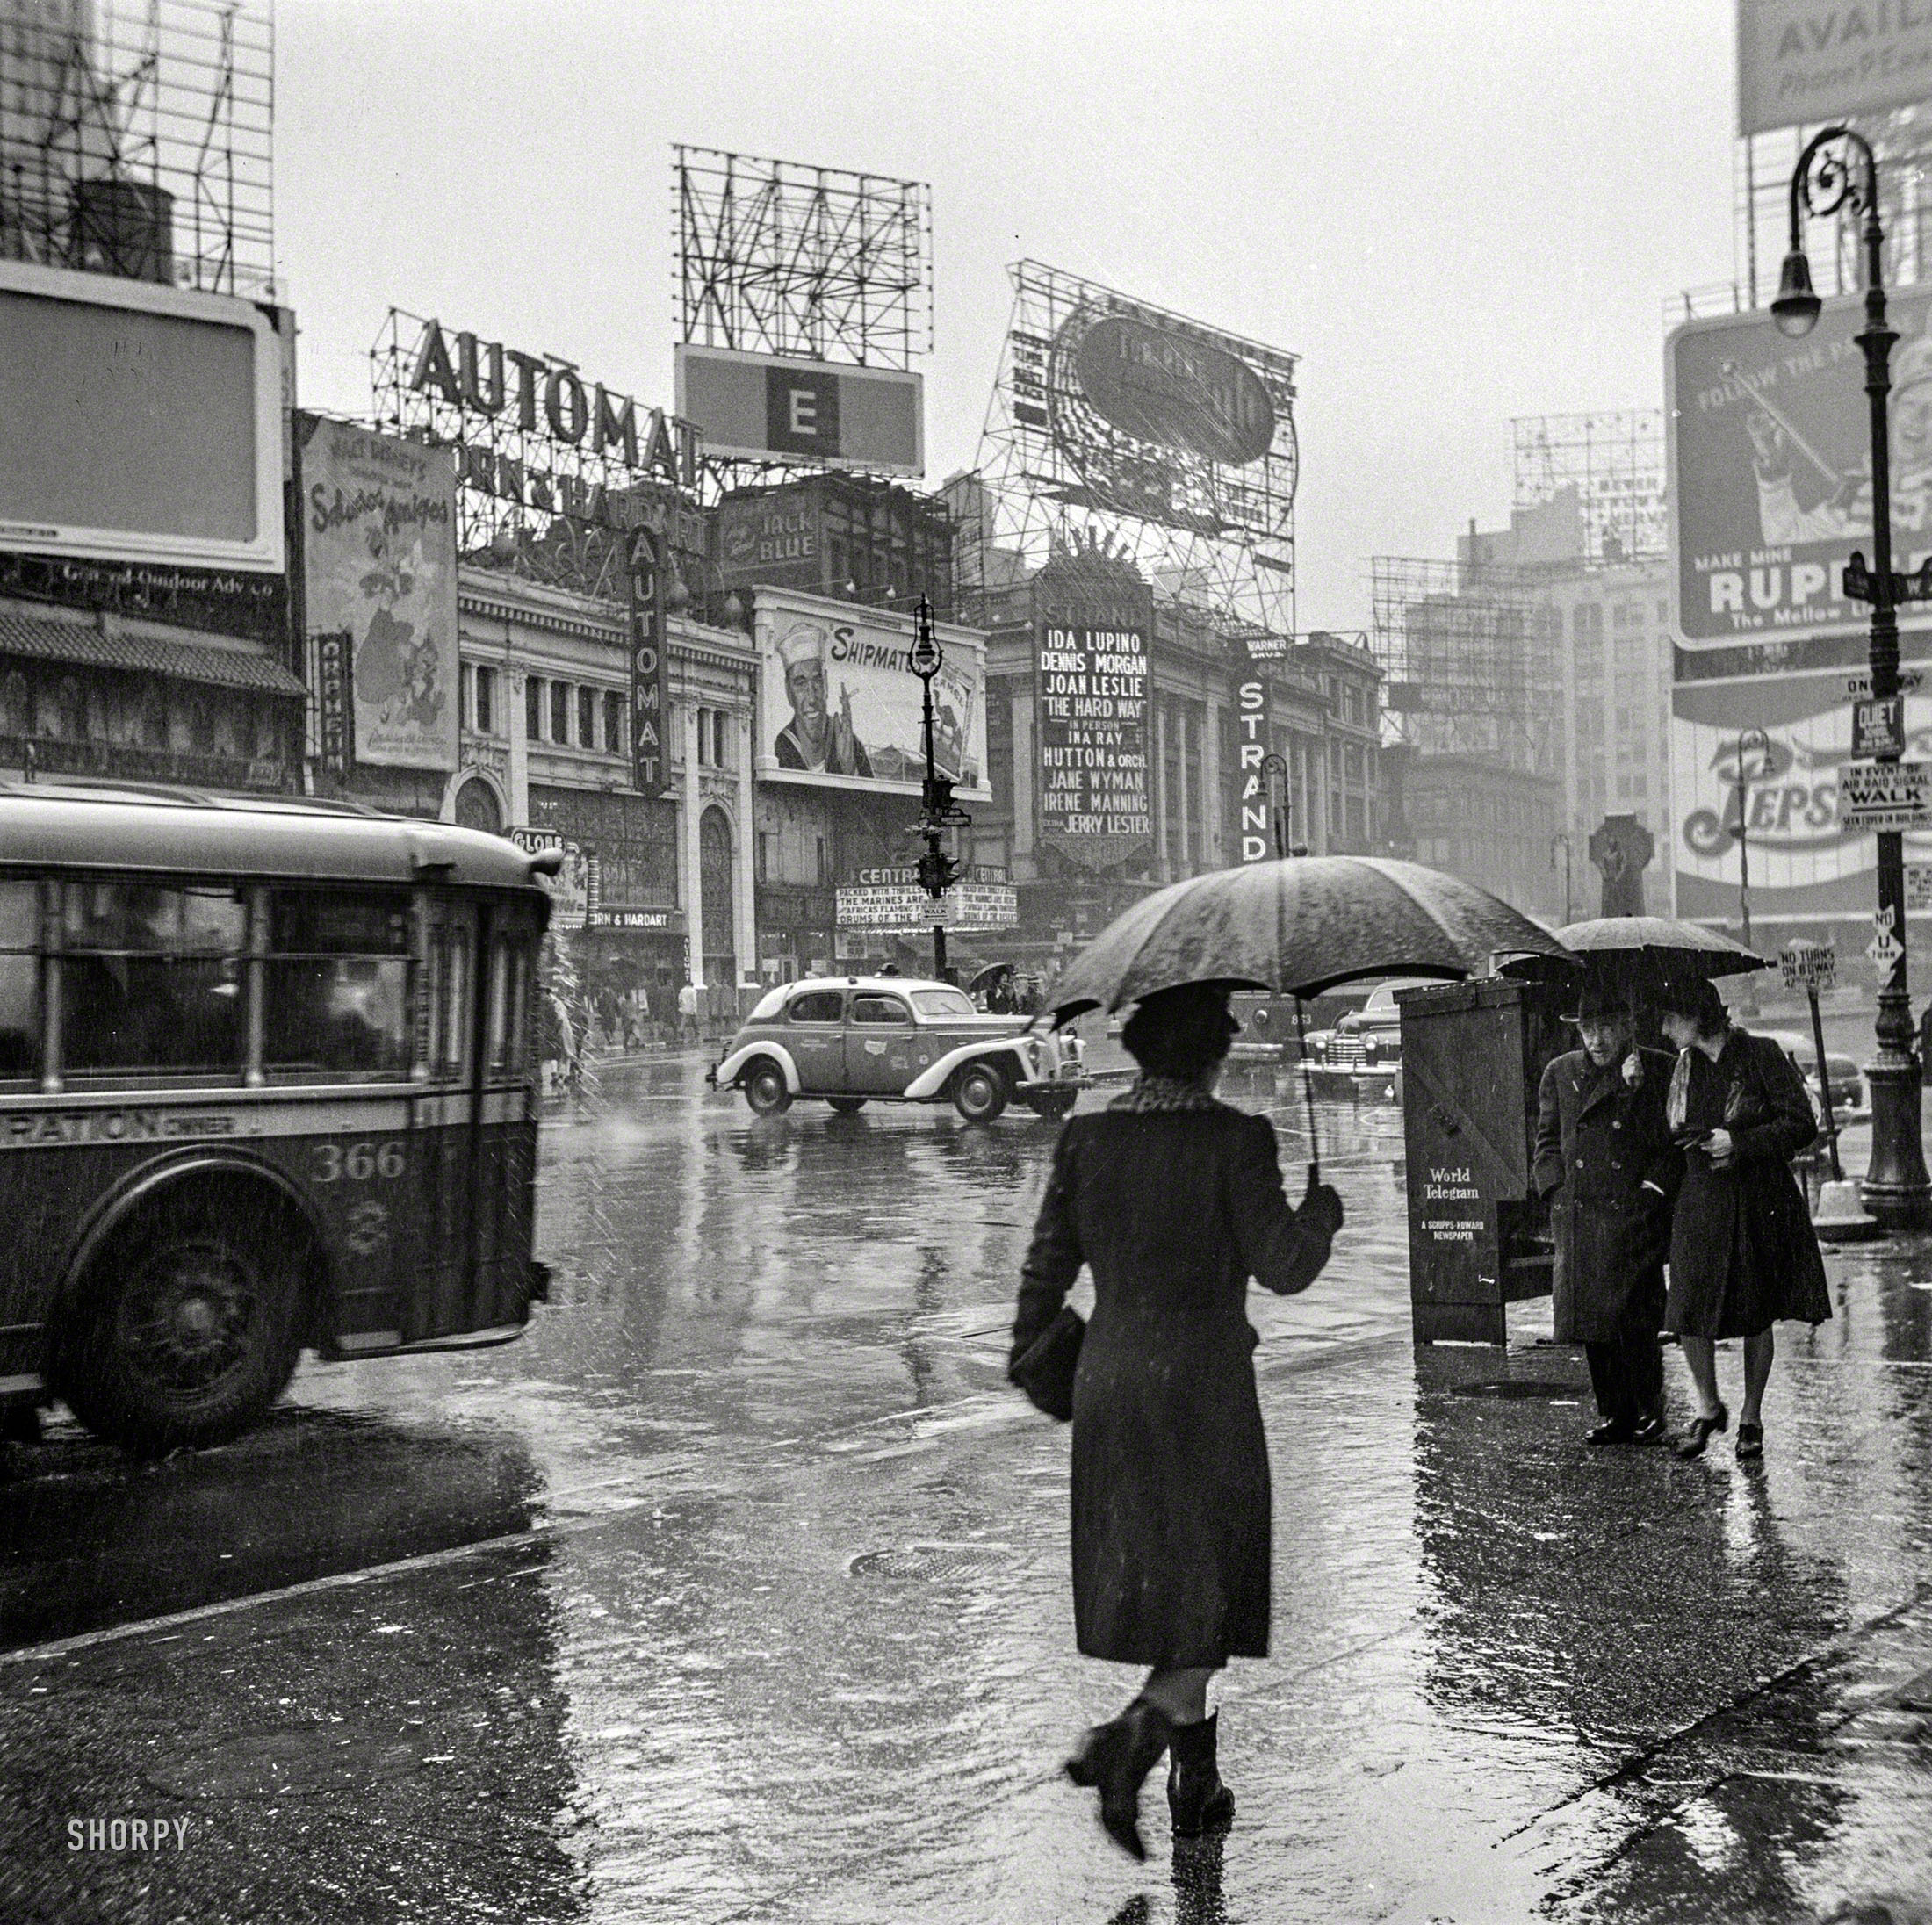 March 1943. "New York, New York. Times Square on a rainy day." Photo by John Vachon for the Office of War Information. View full size.